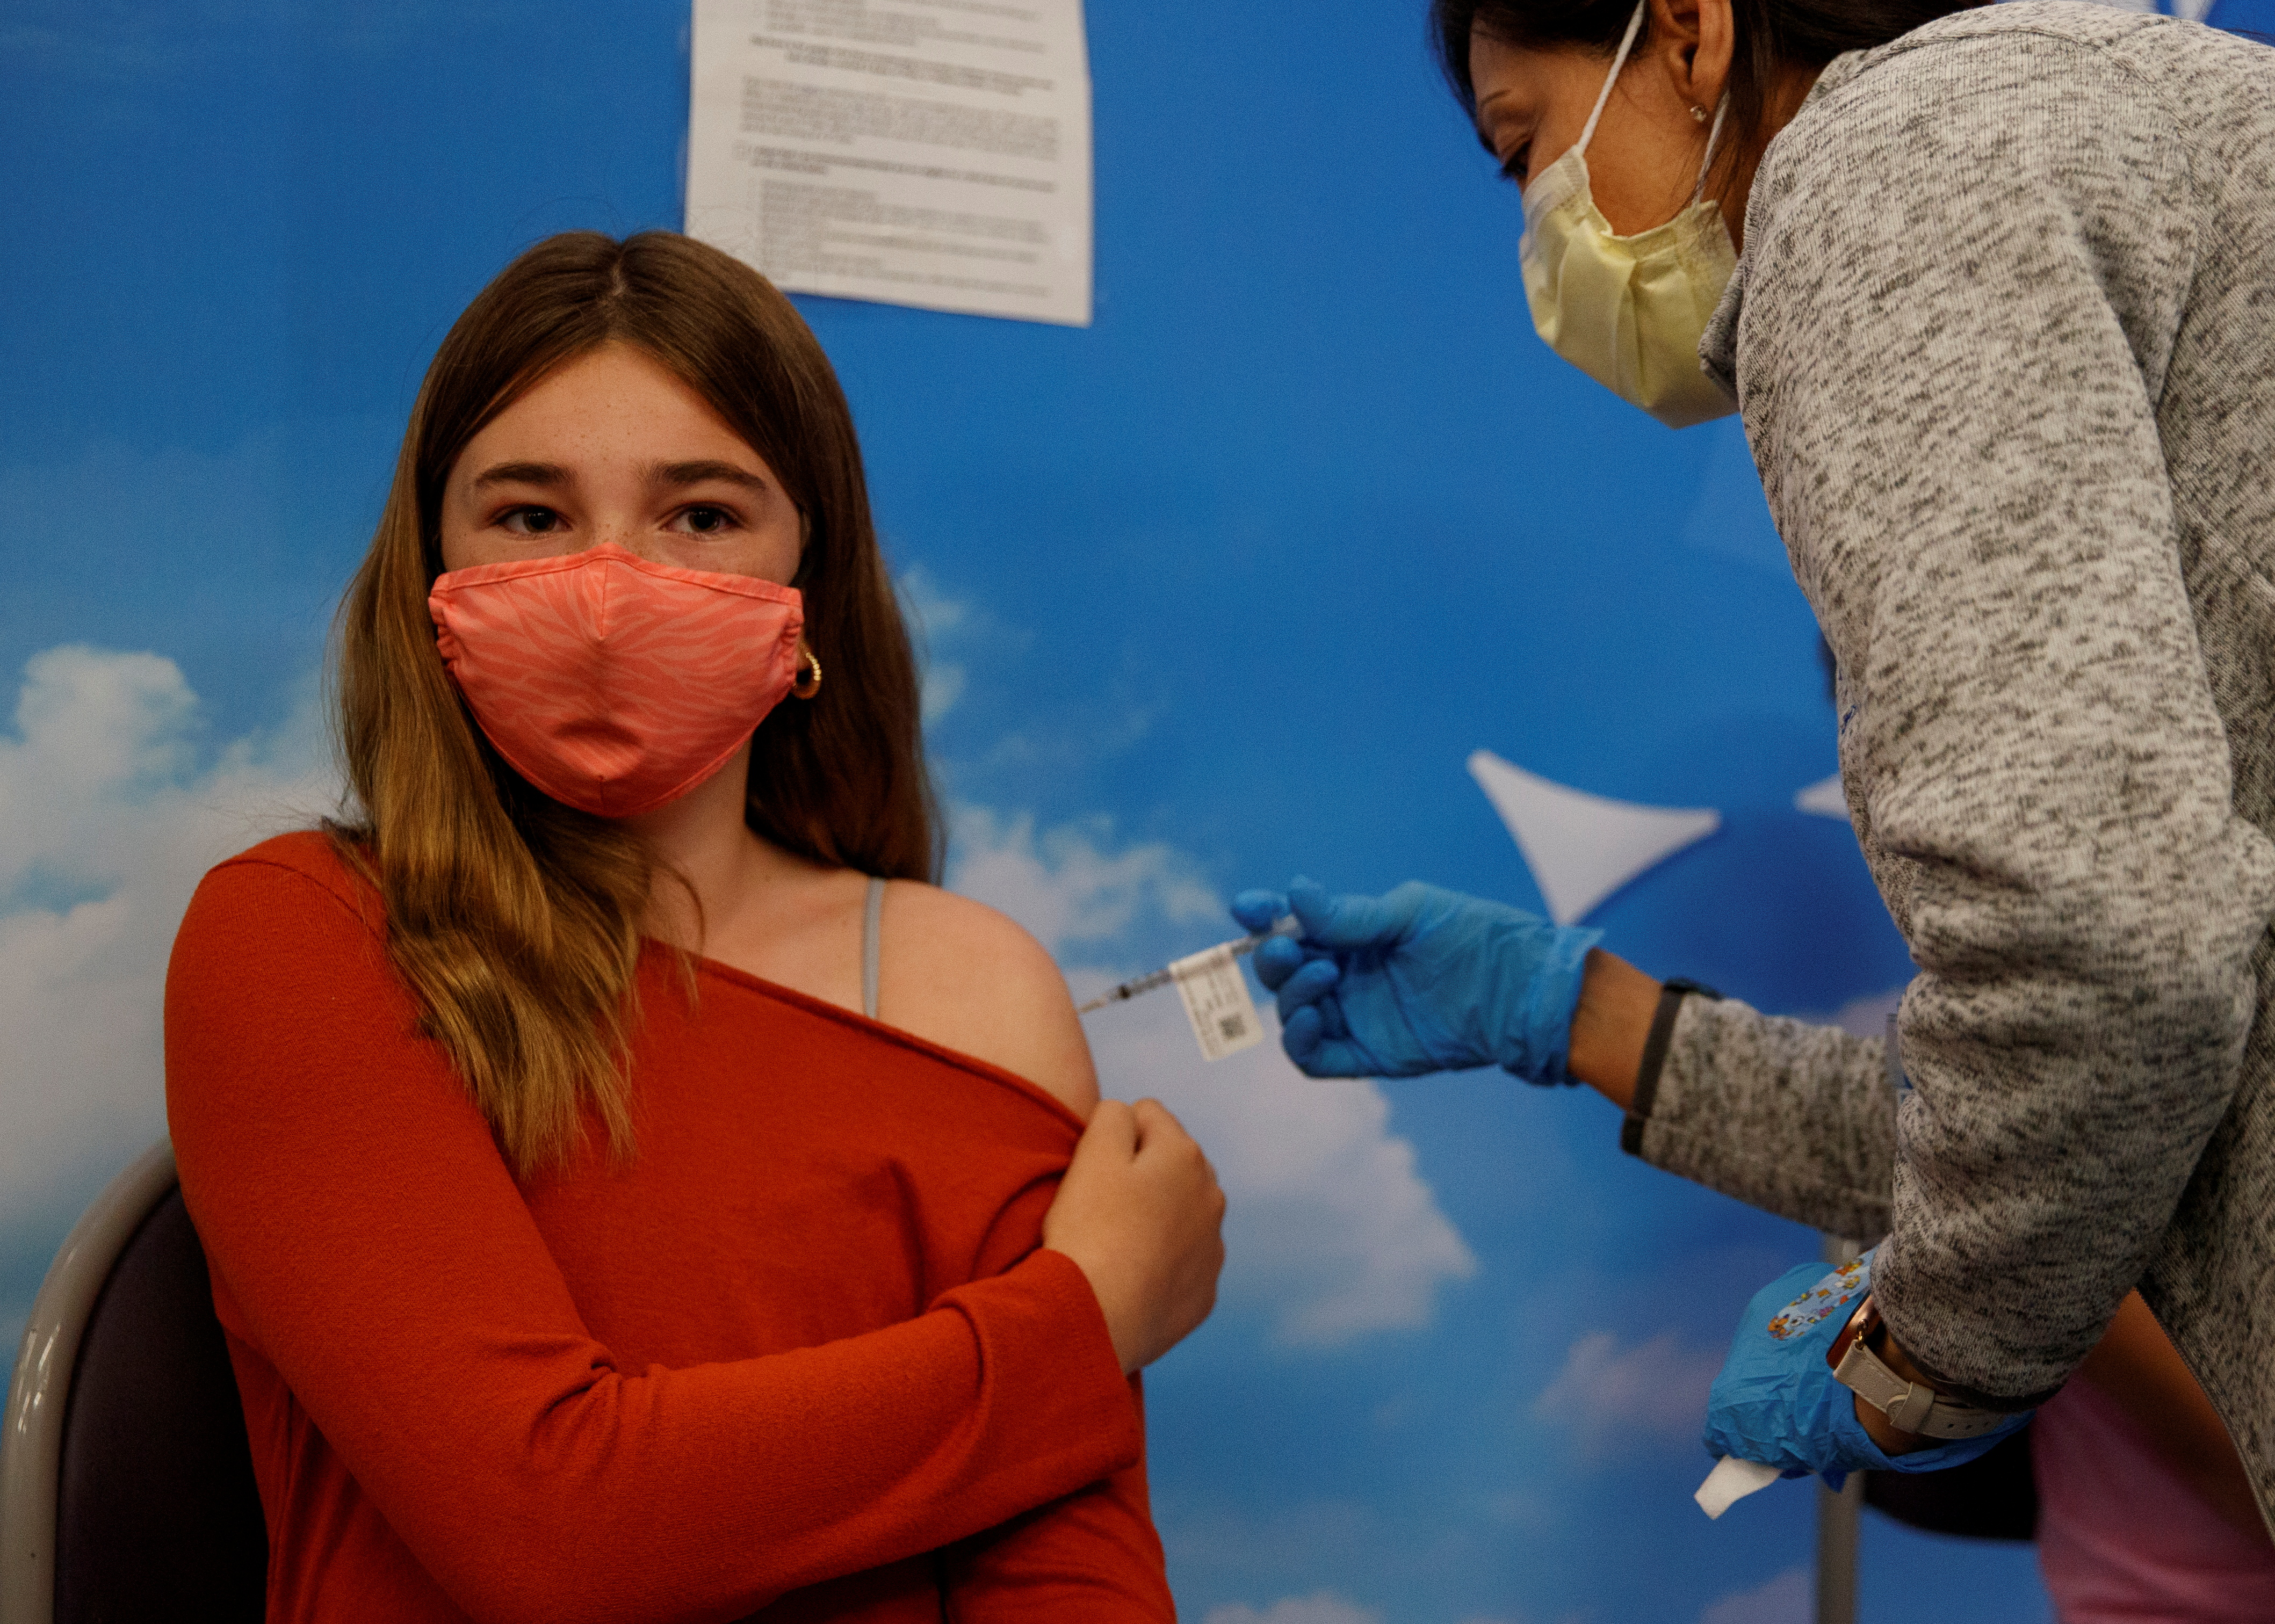 Eleven year-old Victoria Stout receives the Pfizer-BioNTech coronavirus vaccine at Rady's Children's hospital vaccination clinic in San Diego, California, U.S., November 3, 2021.  REUTERS/Mike Blake